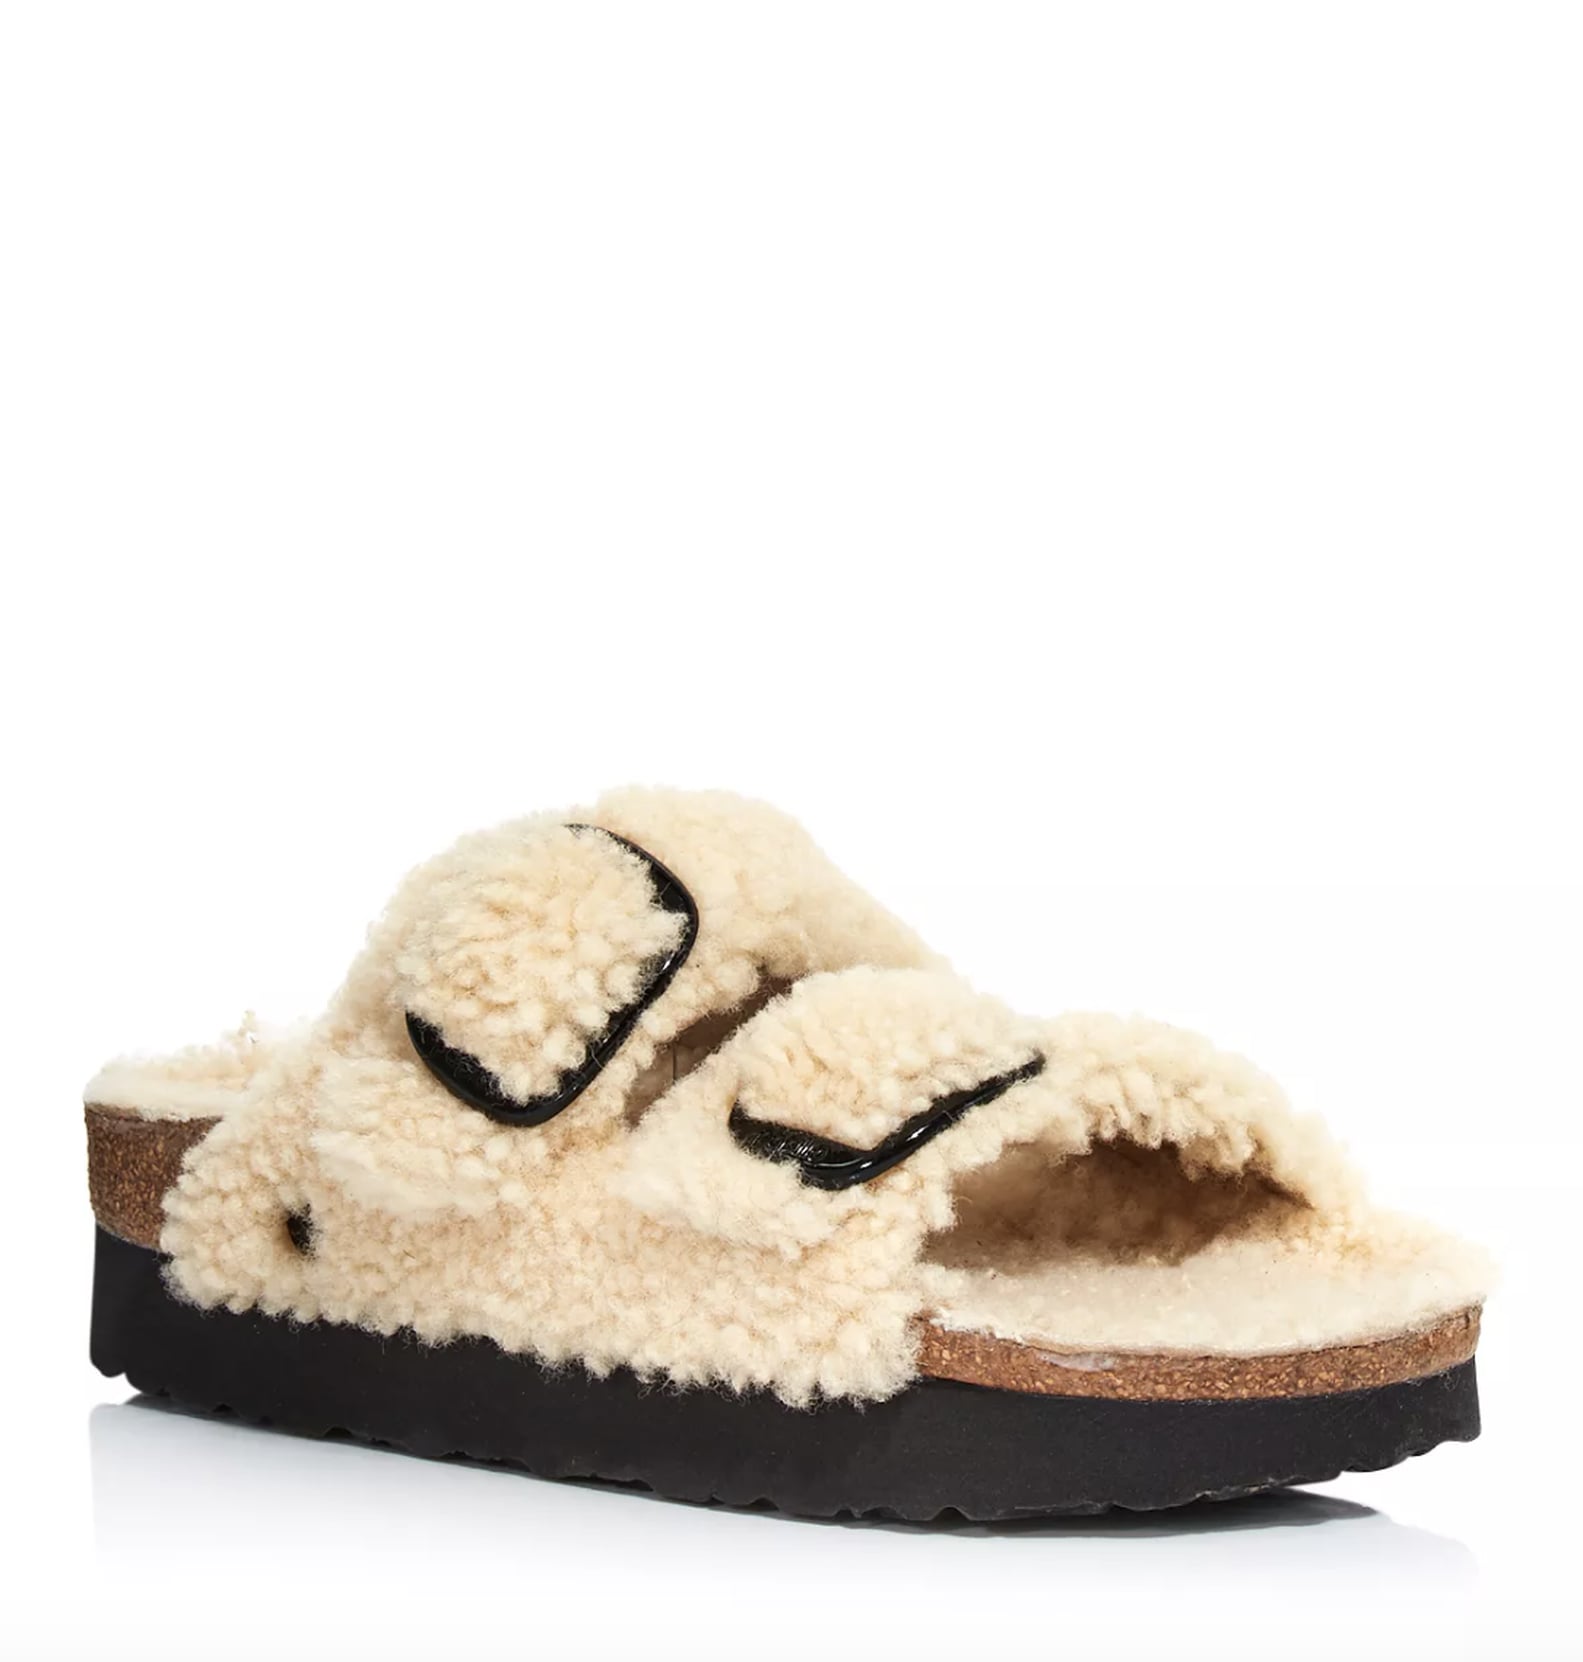 Comfortable Shearling Shoes and Slippers For Women | POPSUGAR Fashion